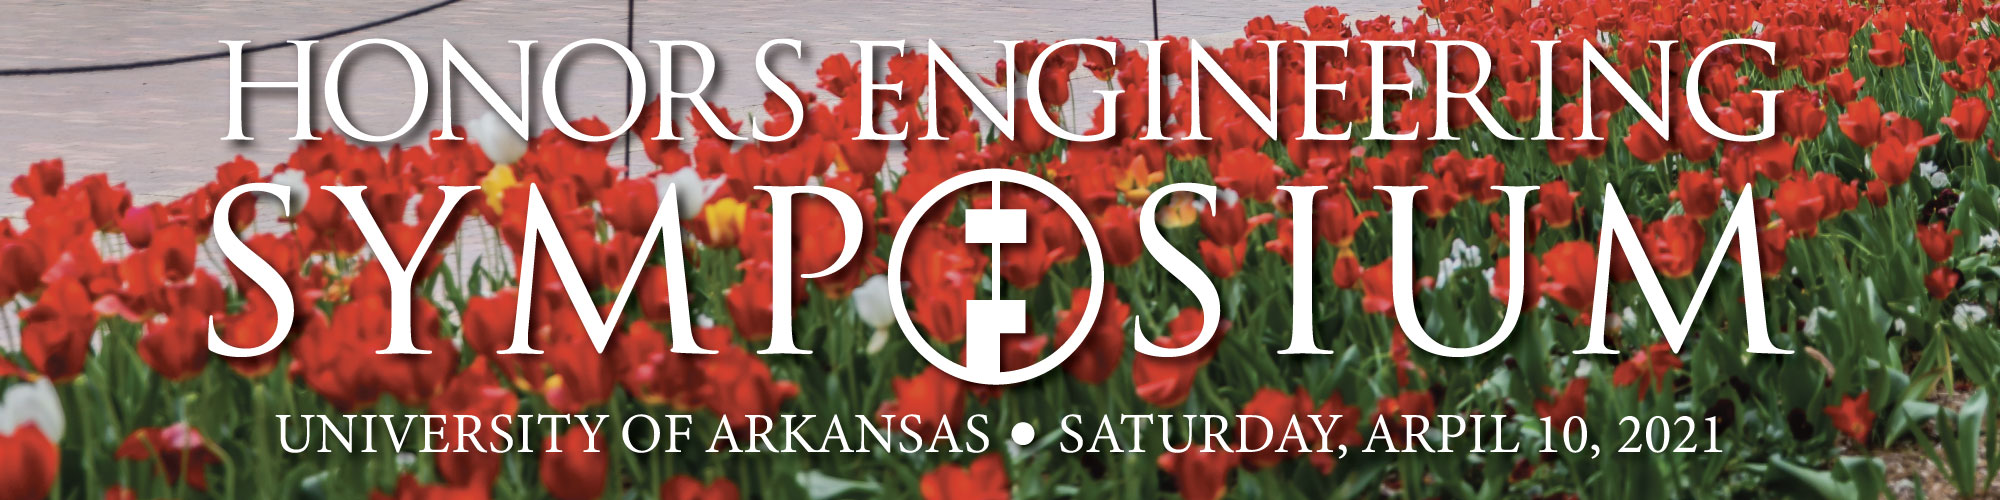 Image of red tulips with words Honors Engineering Symposium, University of Arkansas, Saturday, April 10, 2021